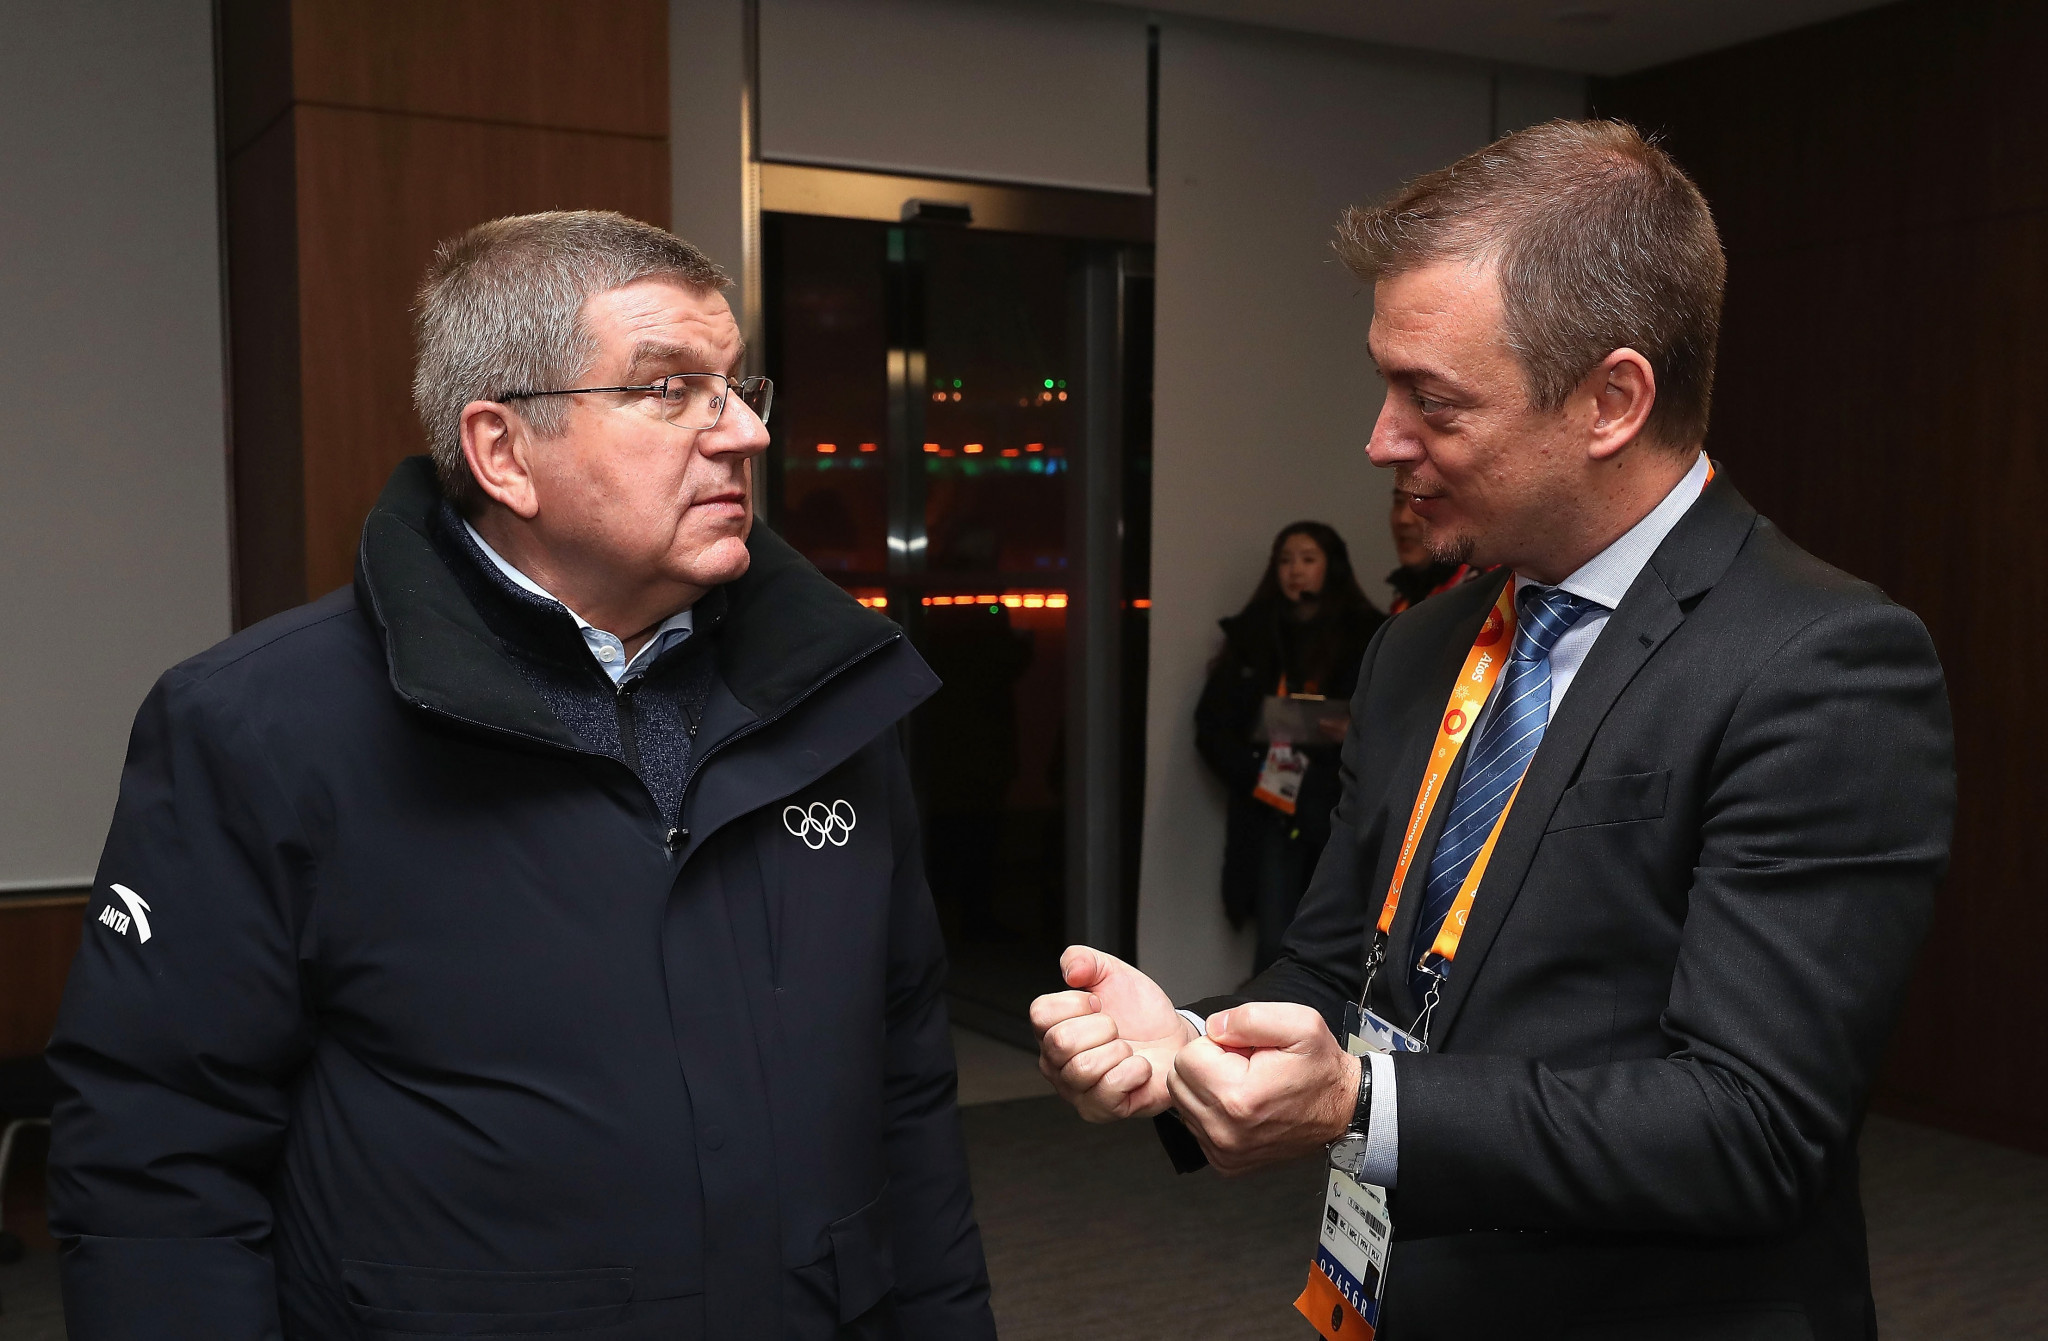 Exclusive: Paris 2024 could go ahead with differing IOC and IPC policies over Russian participation, Parsons admits